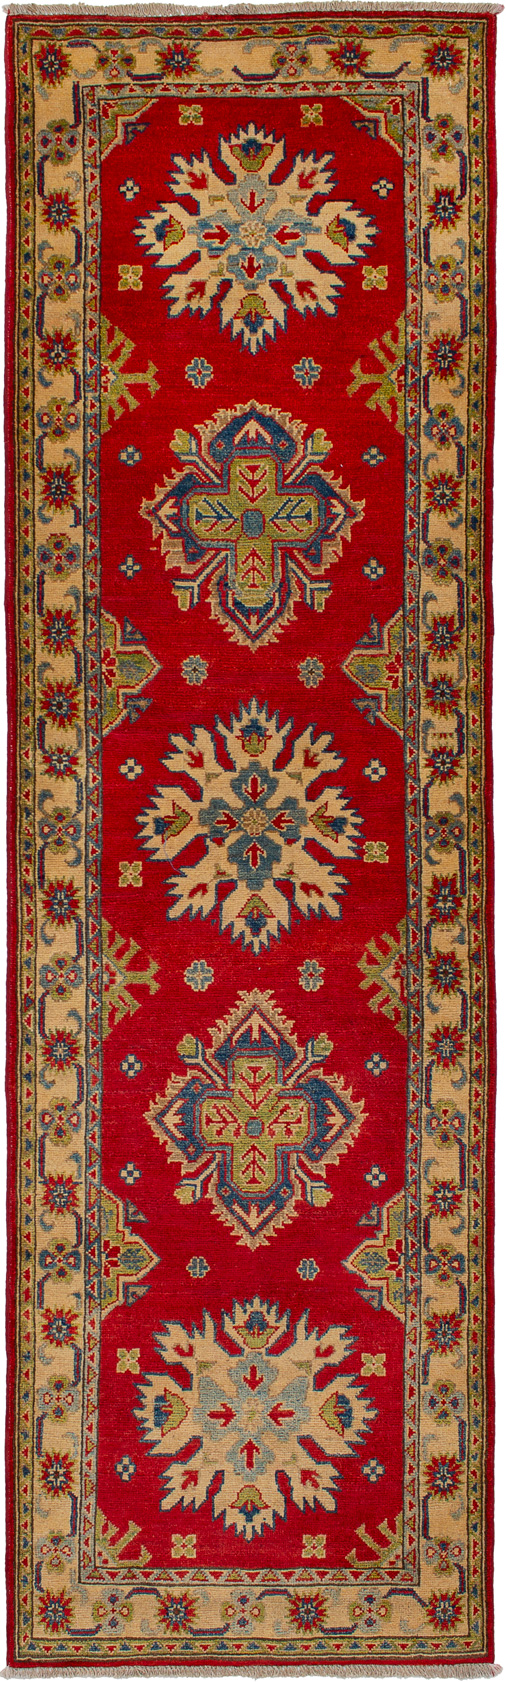 Hand-knotted Finest Gazni Red Wool Rug 2'8" x 9'3"  Size: 2'8" x 9'3"  